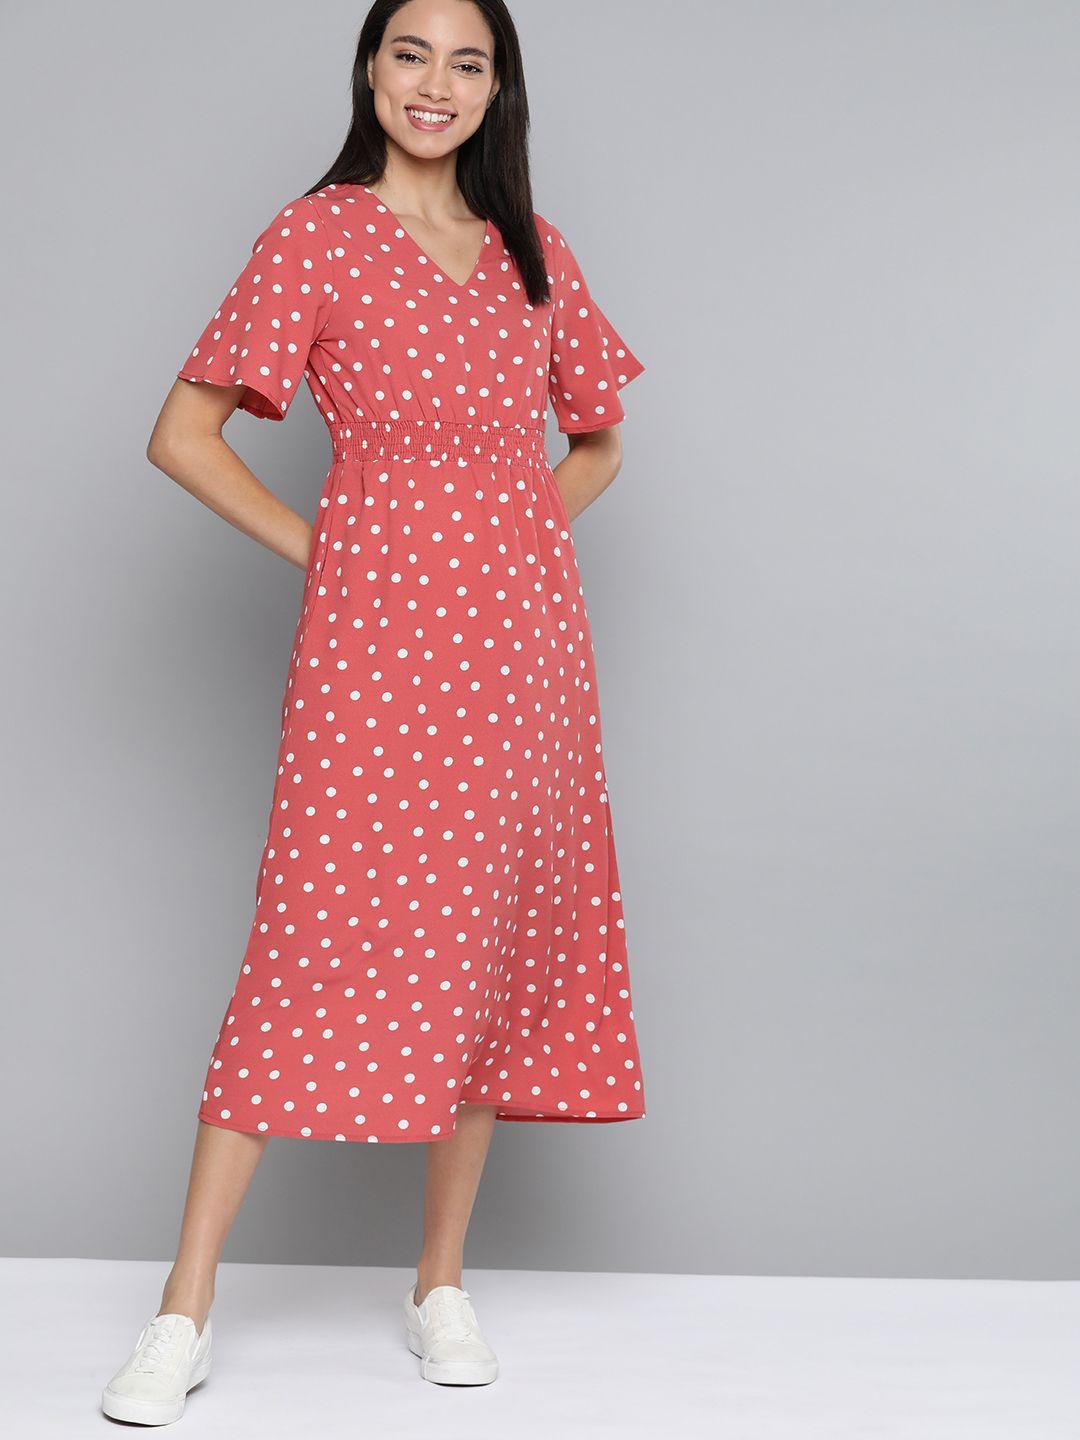 mast & harbour women coral red & white polka dots printed a-line dress